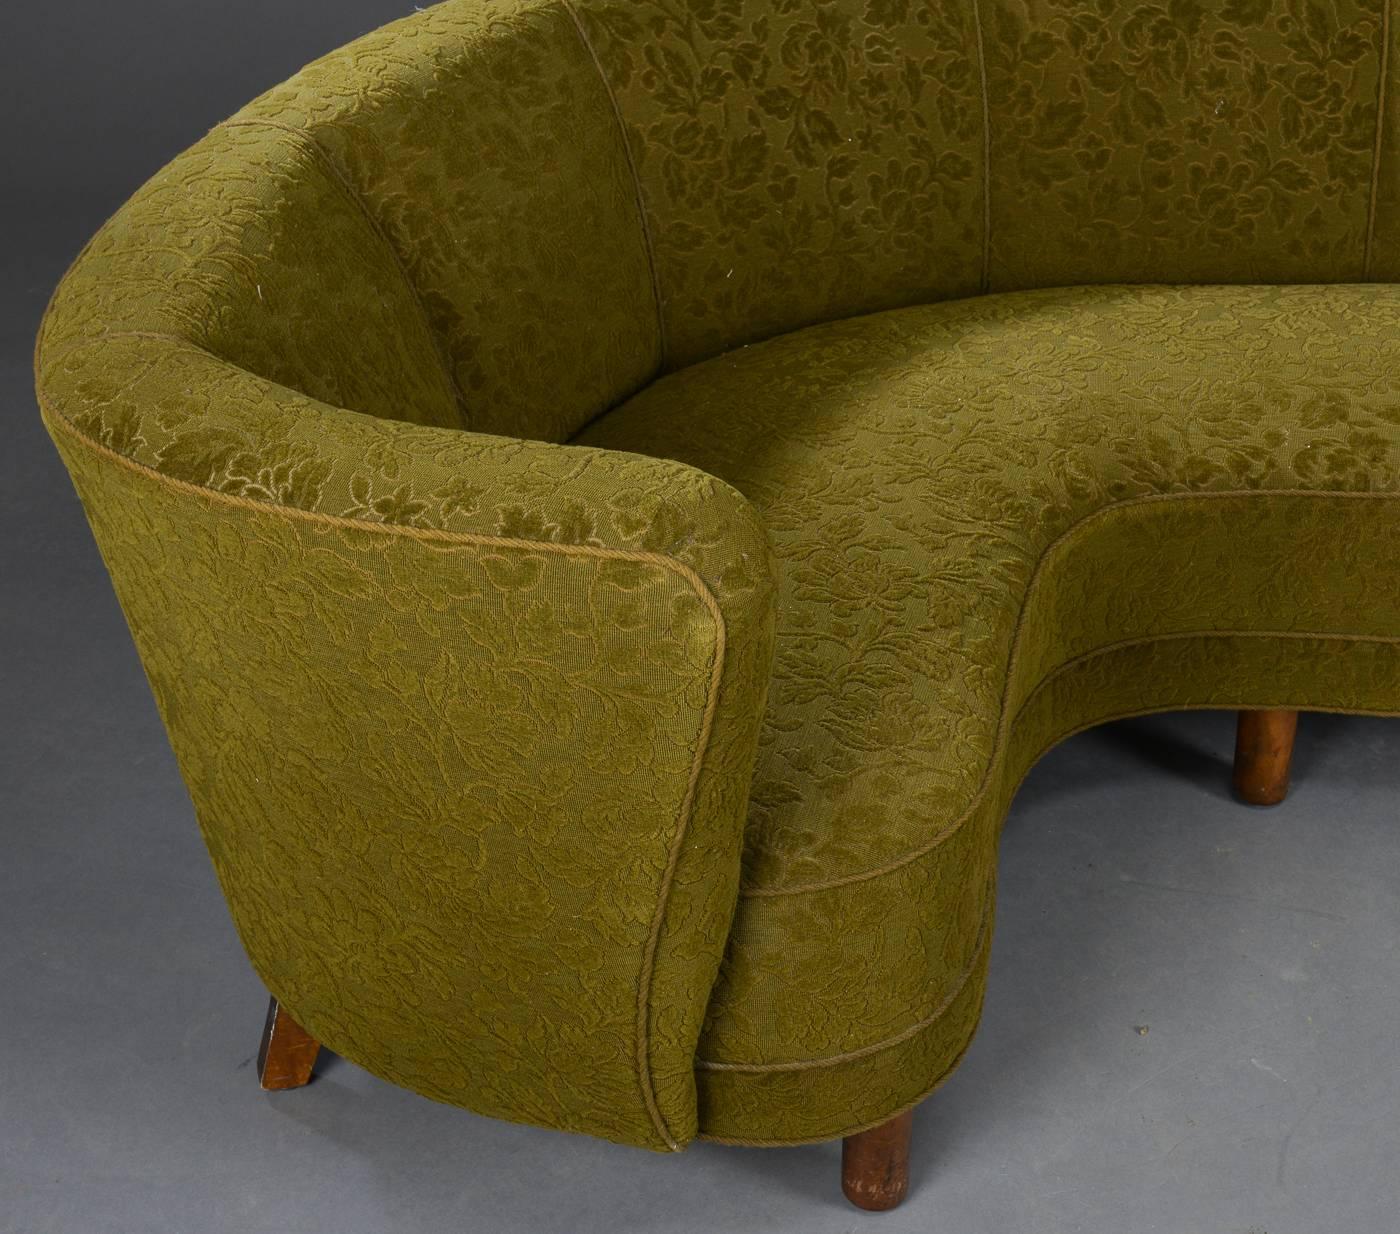 A very comfortable Danish modern green upholstered corner sofa from 1940s. Also very well built and sturdy, with beech legs. The upholstery is original.
A matching pair of tub chairs is available making a cosy living room set.
Upholstery in good